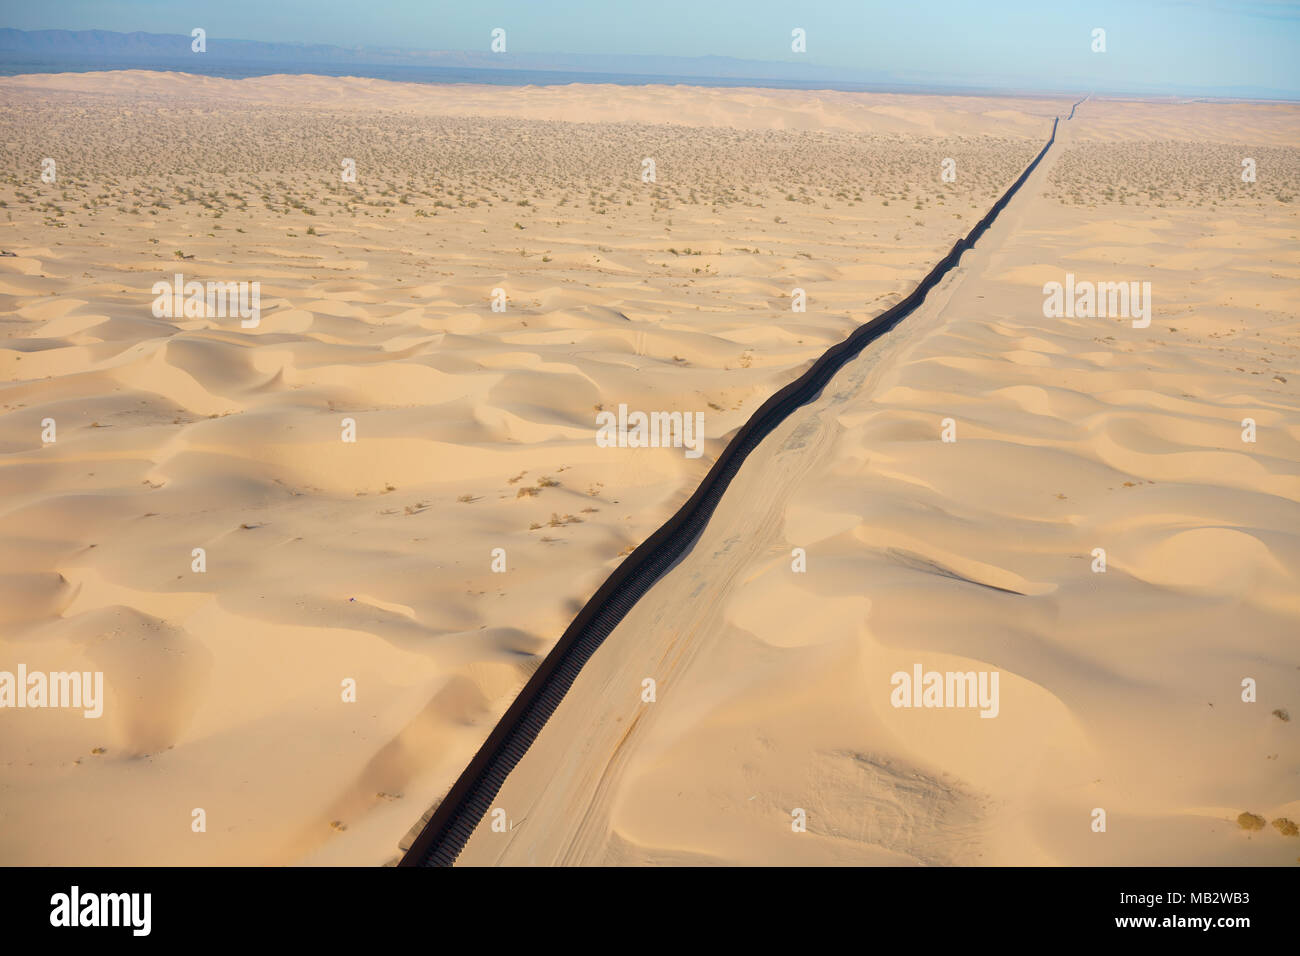 AERIAL VIEW. International border between Mexico (left of wall) and the United States. Algodones Dunes, Sonoran Desert, Baja California, Mexico. Stock Photo